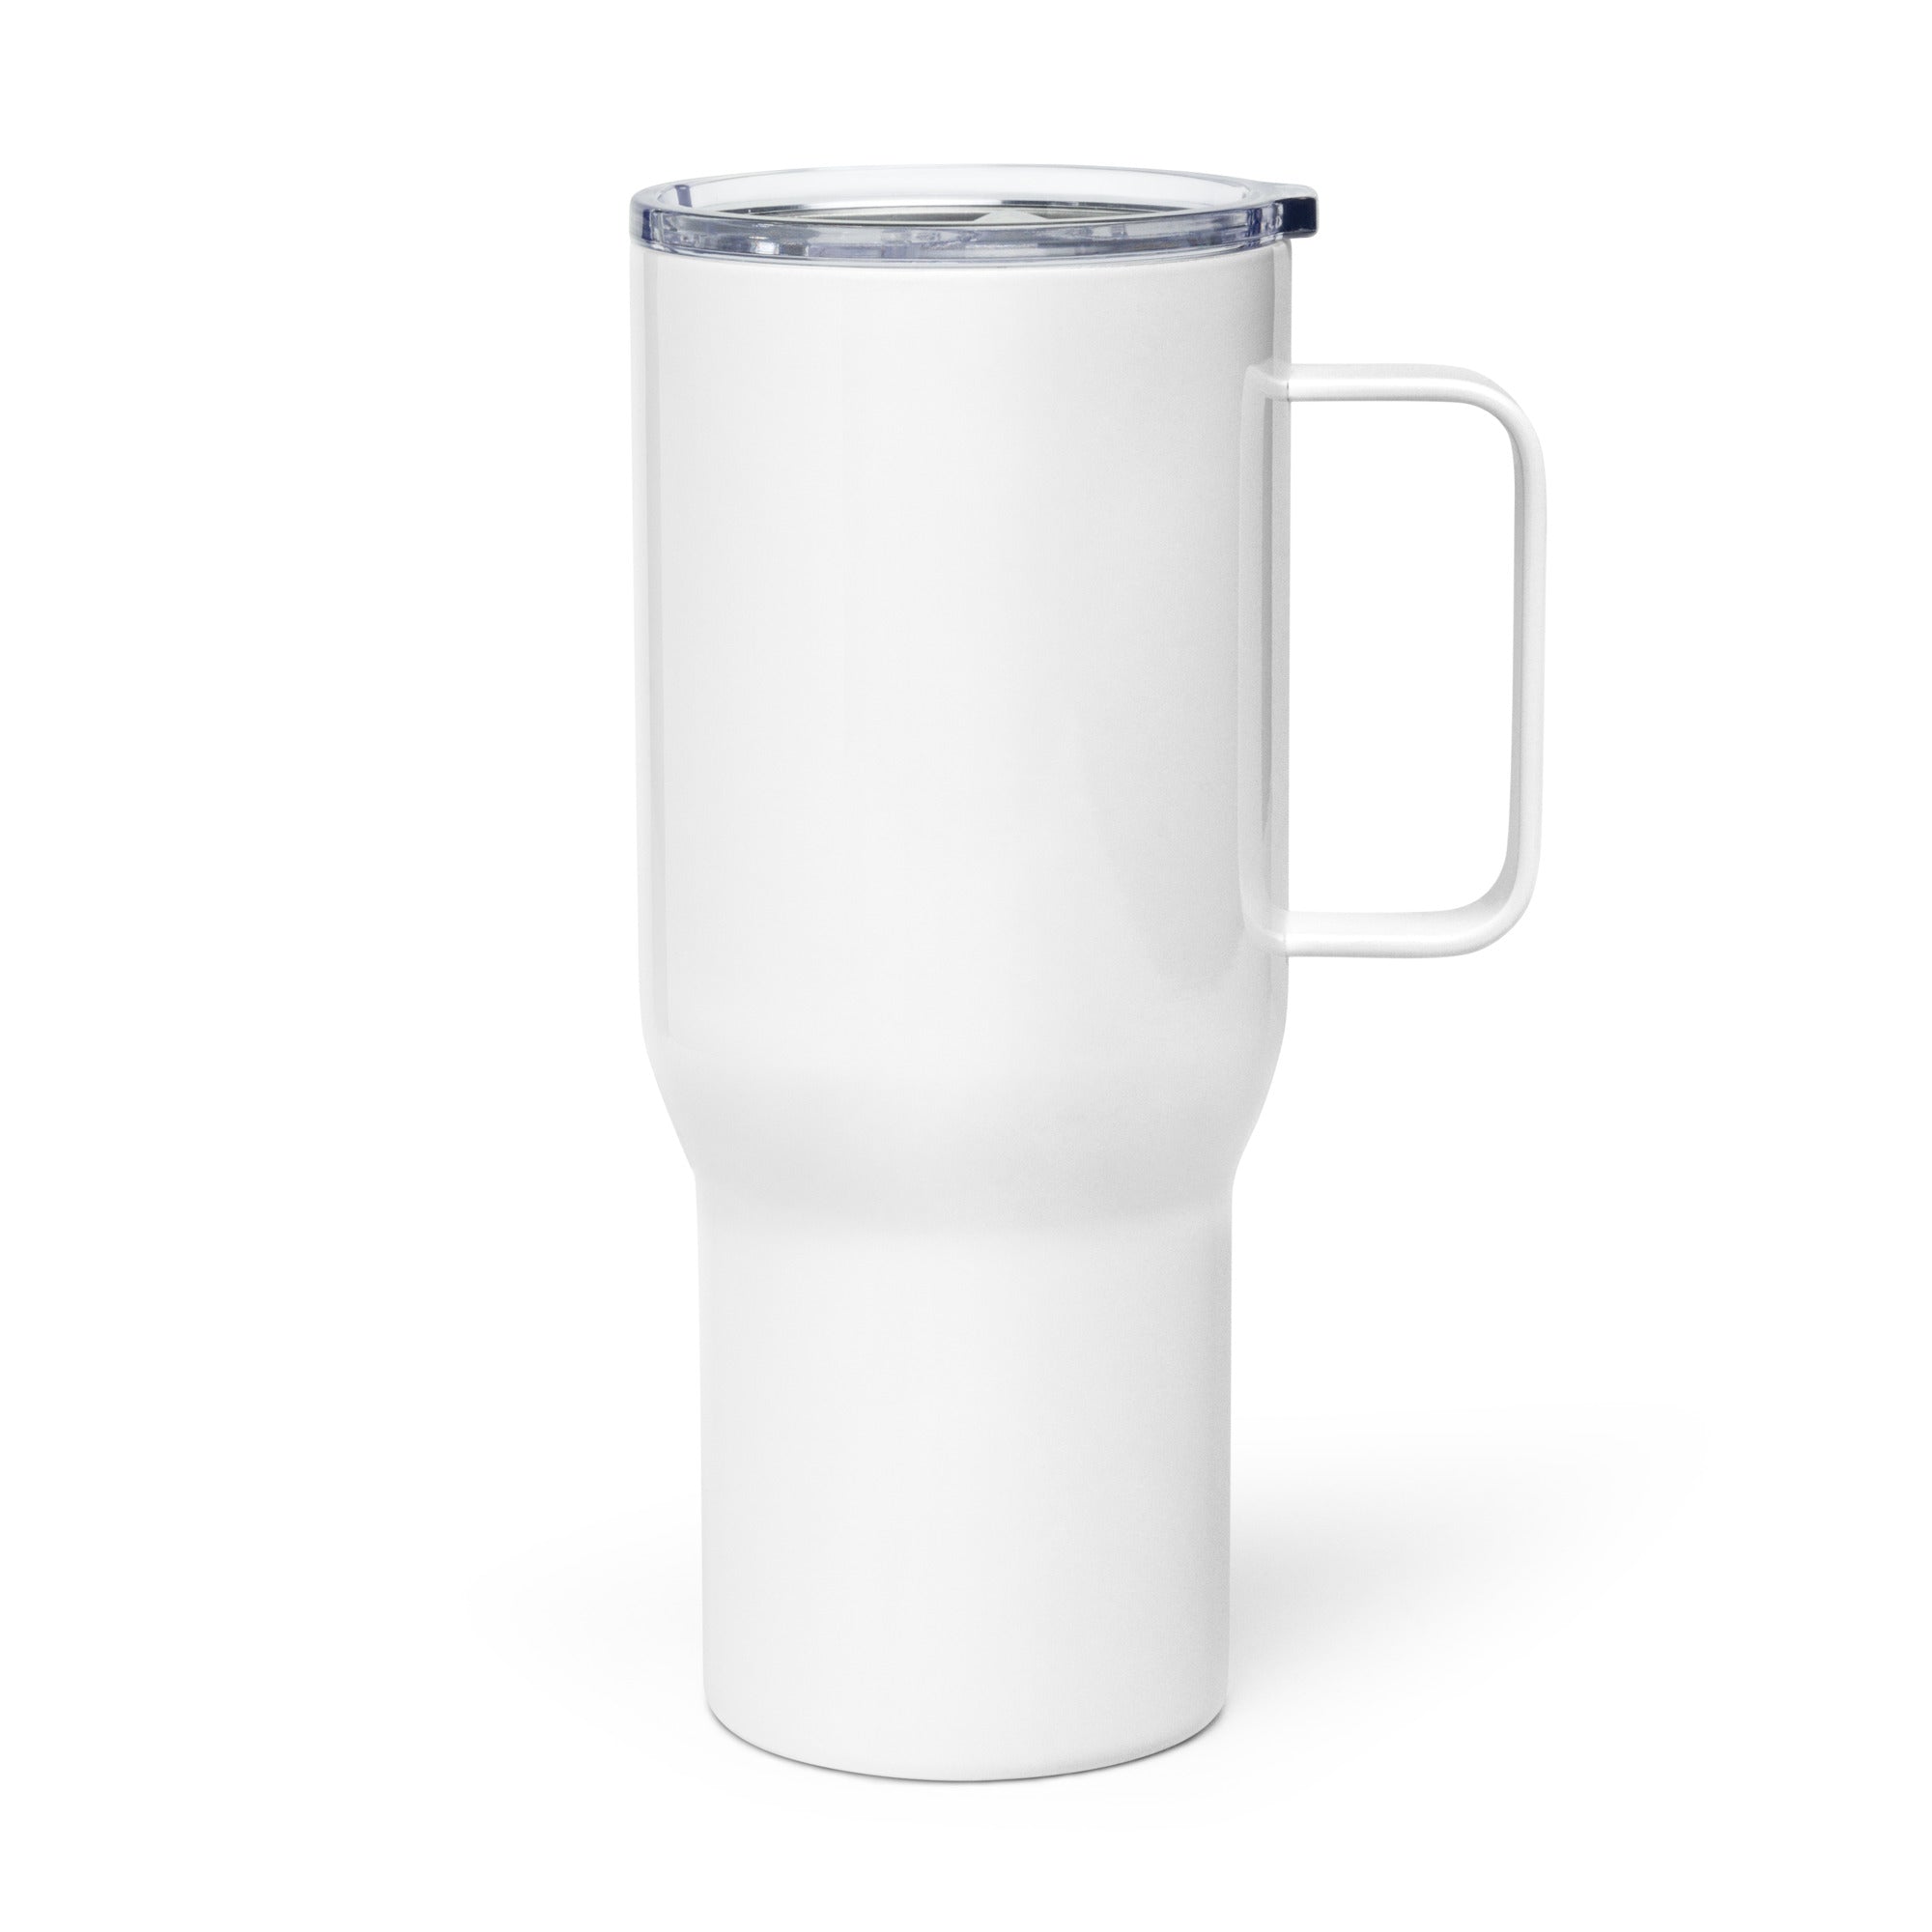 Bedford Travel mug with a handle